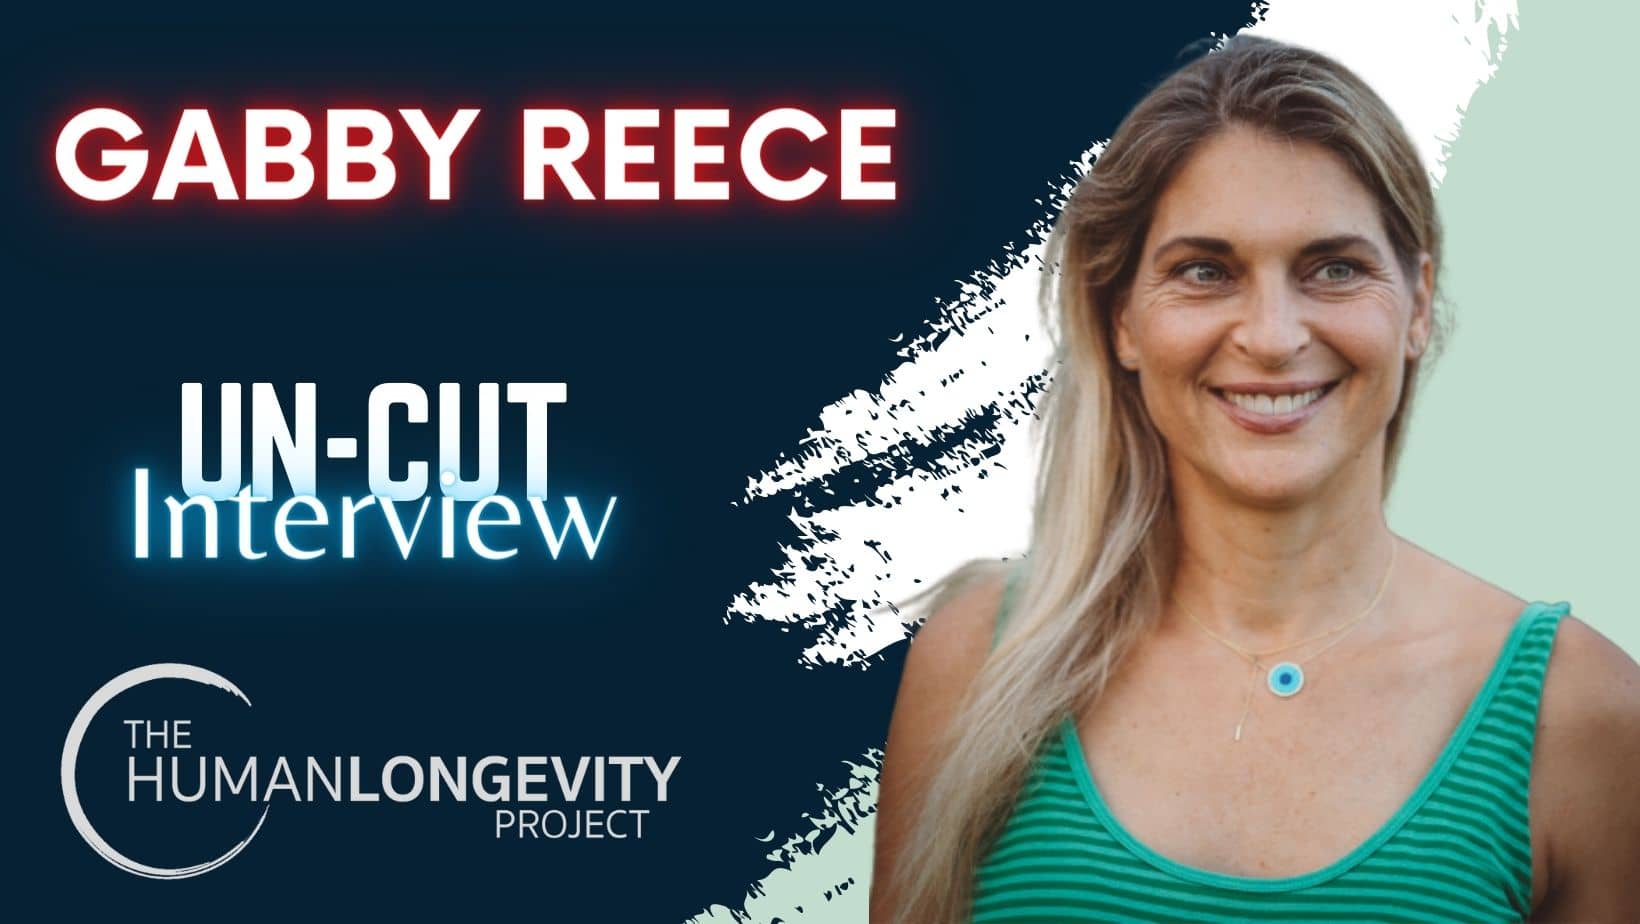 Human Longevity Project Uncut Interview With Gabby Reece